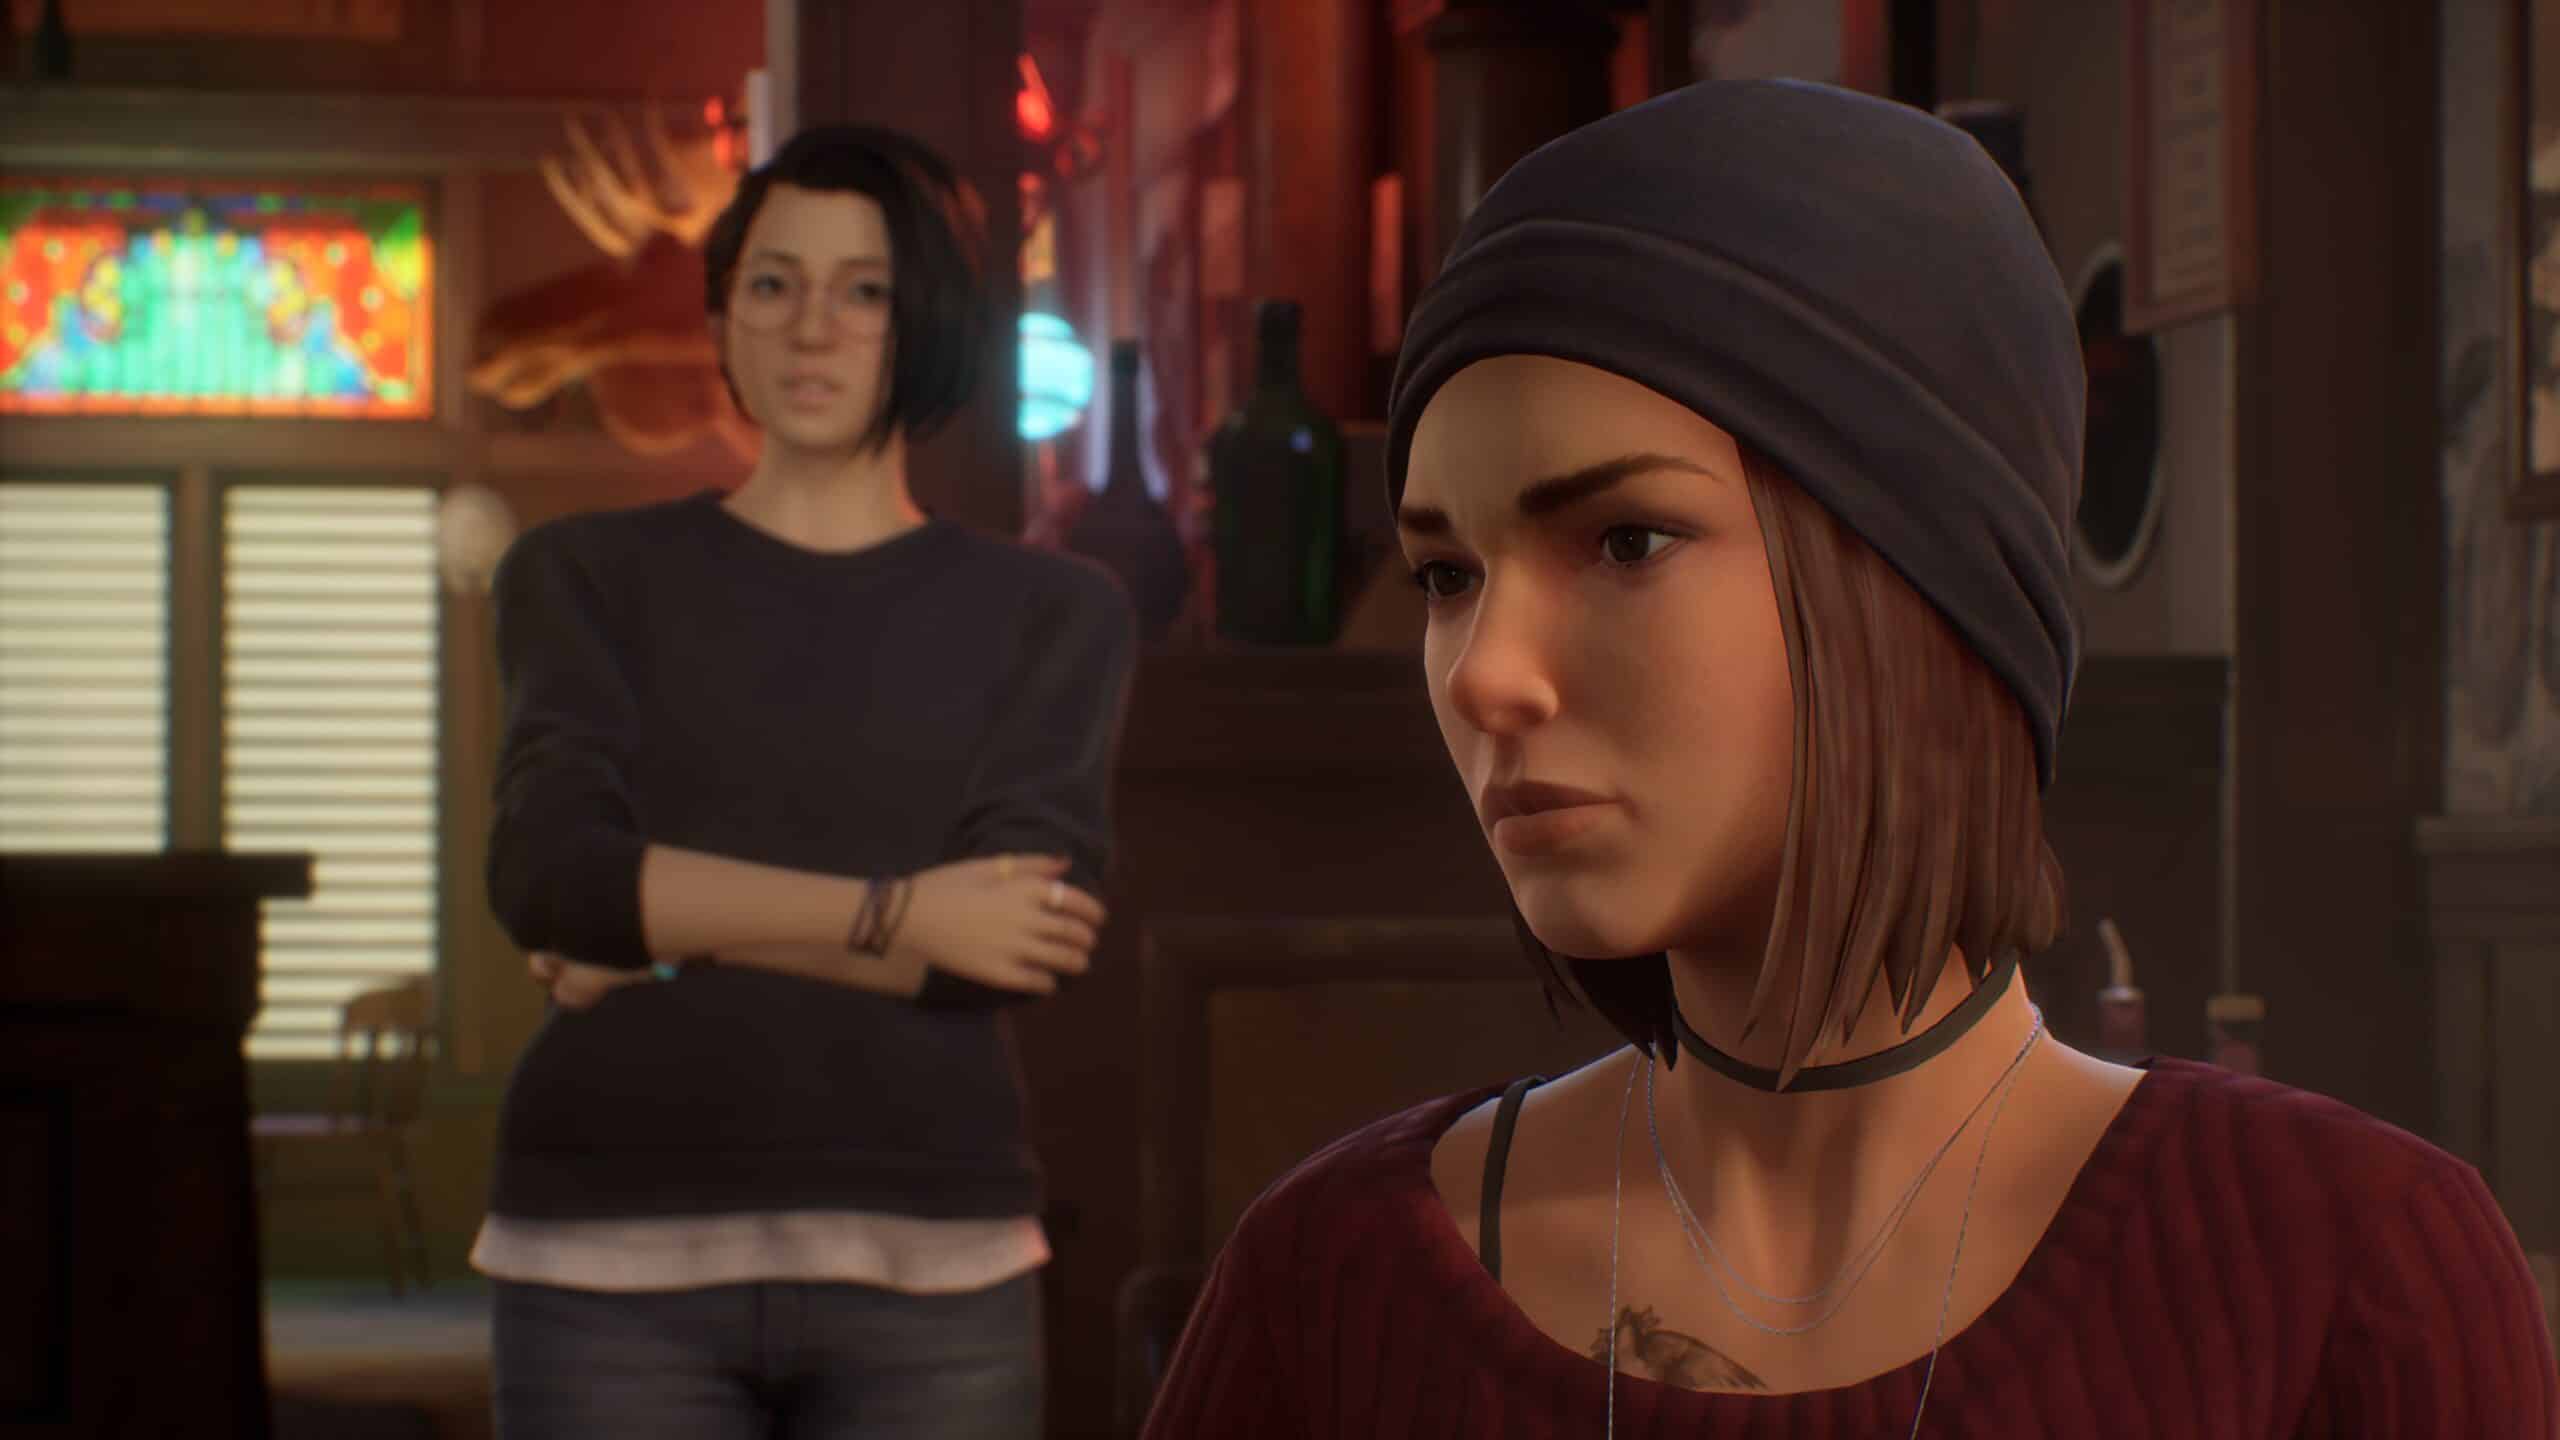 The future of Life is Strange: how True Colors is leading the series into  the next generation